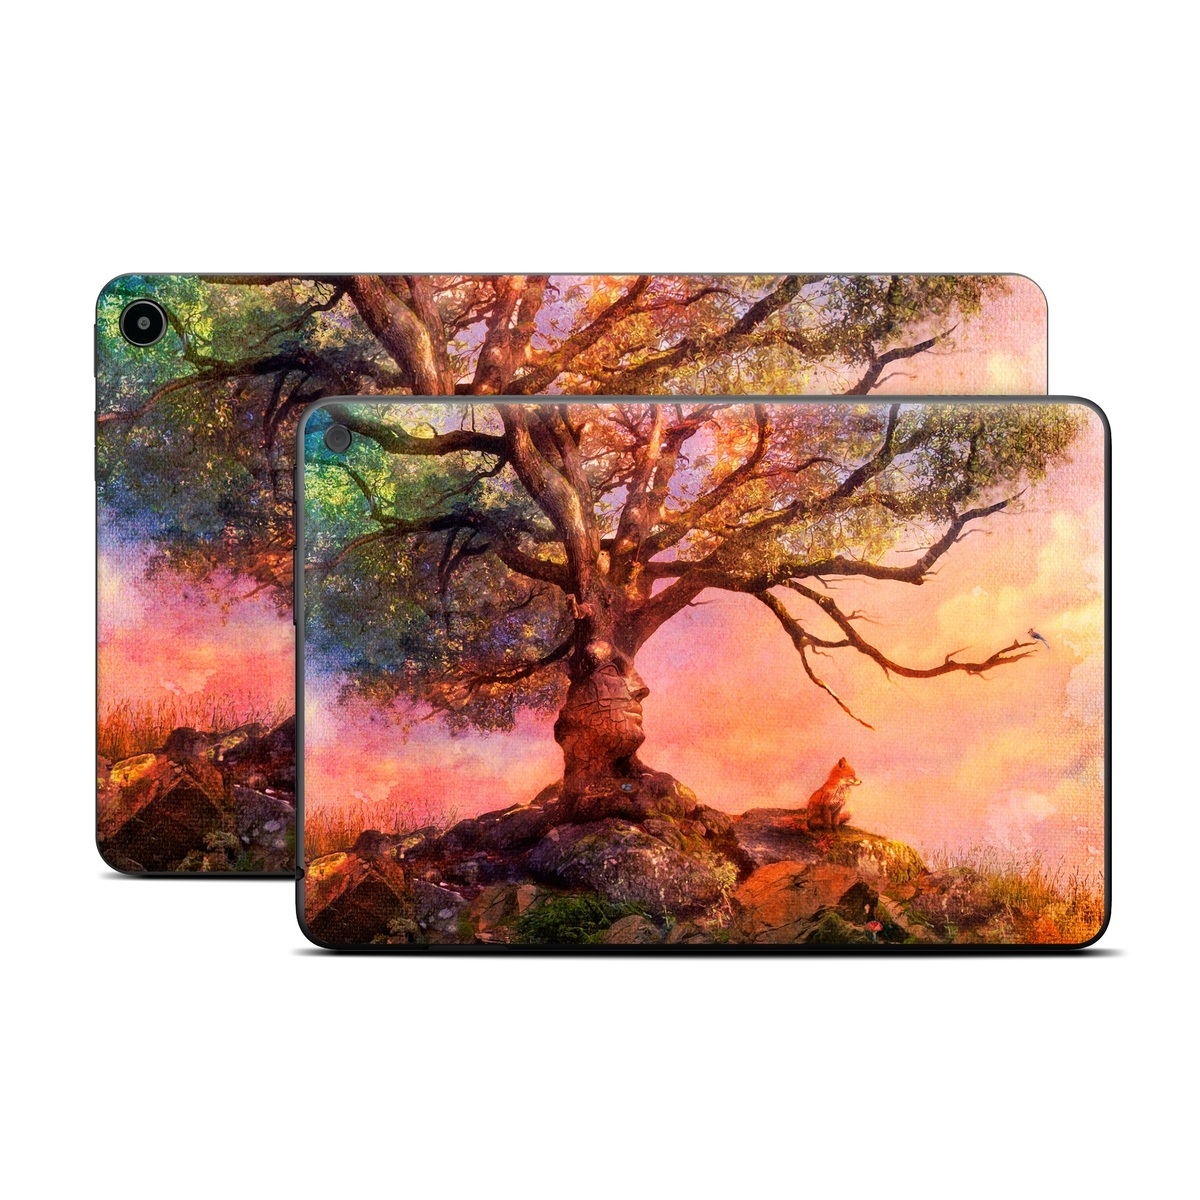 Amazon Fire Tablet Series Skin Skin design of Nature, Tree, Sky, Natural landscape, Branch, Leaf, Woody plant, Trunk, Landscape, Plant, with pink, red, black, green, gray, orange colors